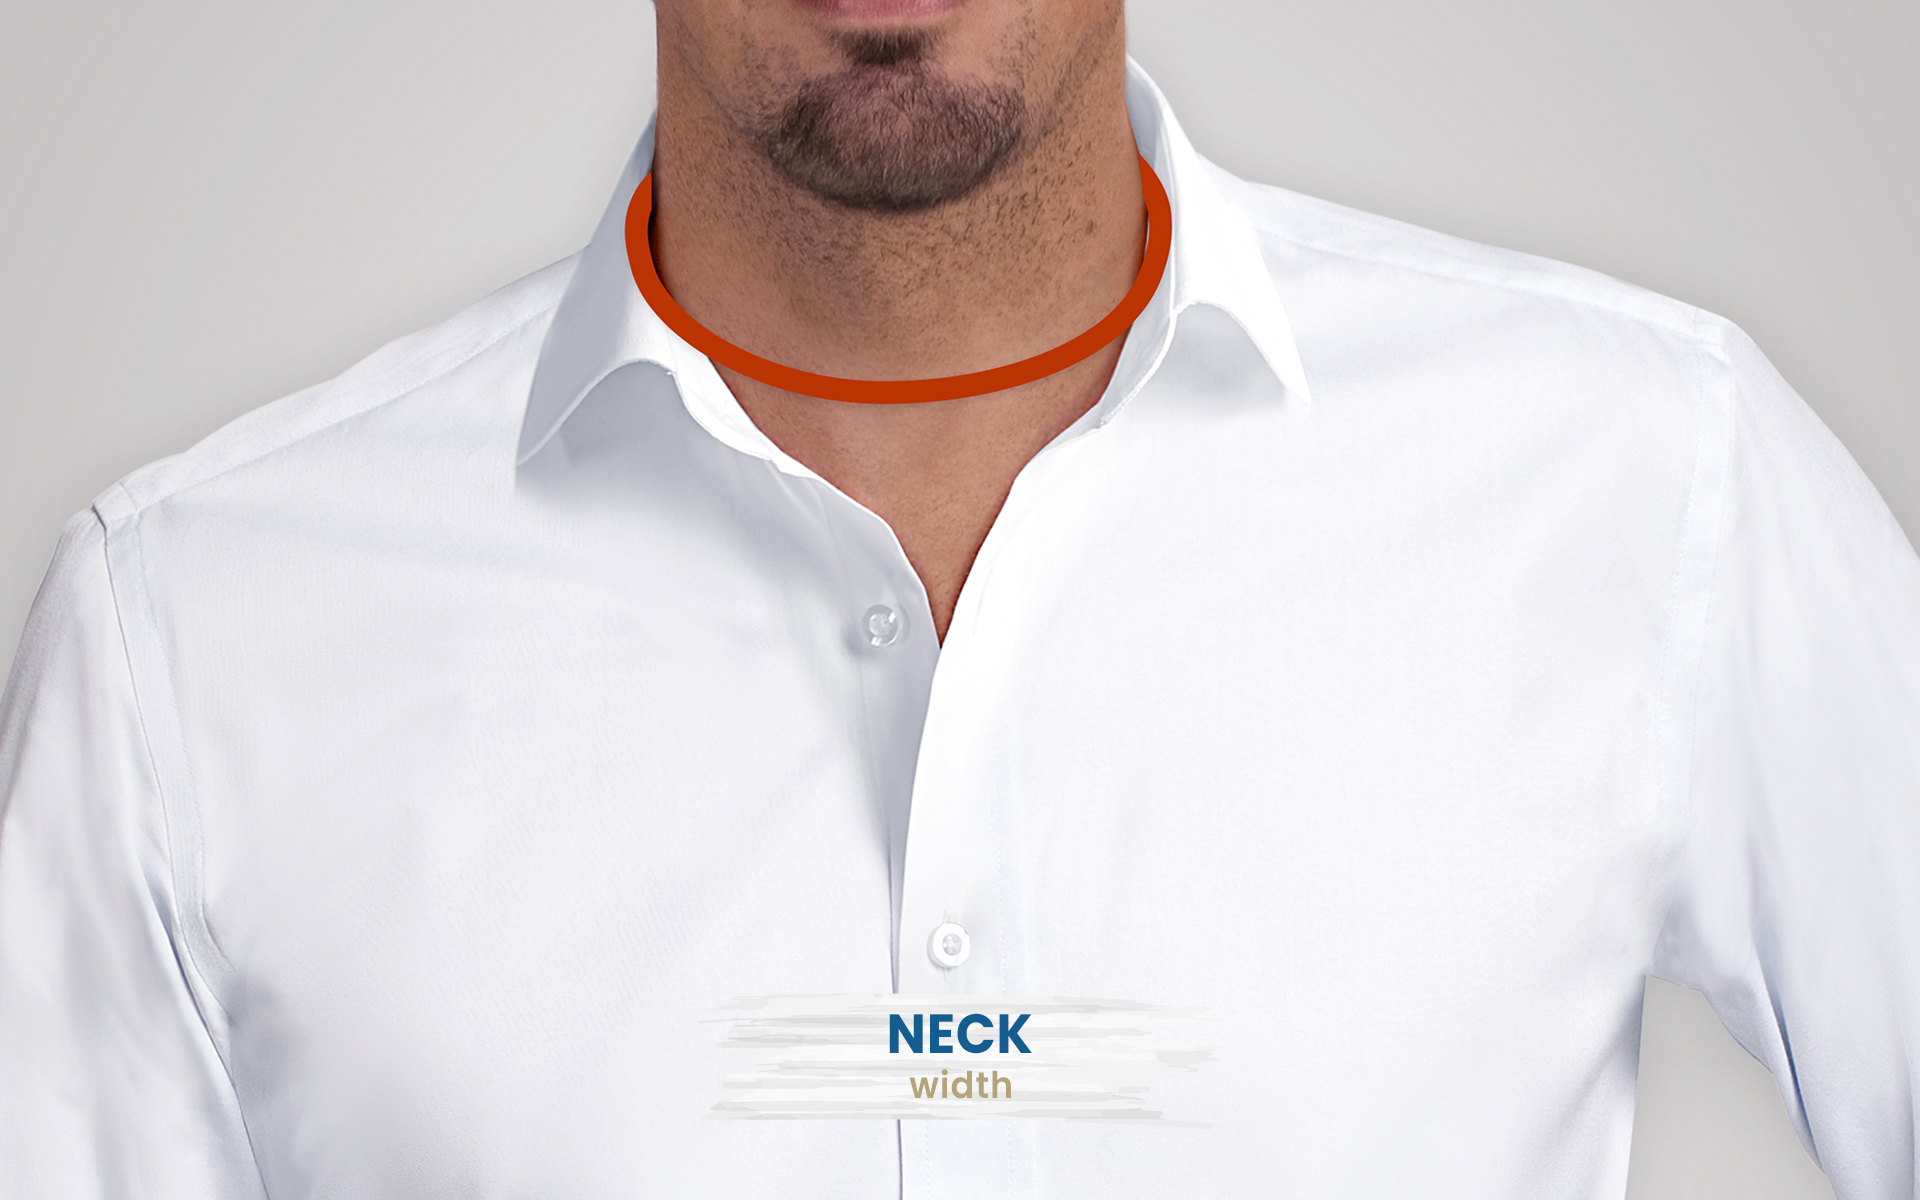 how to measure the neck for a suit